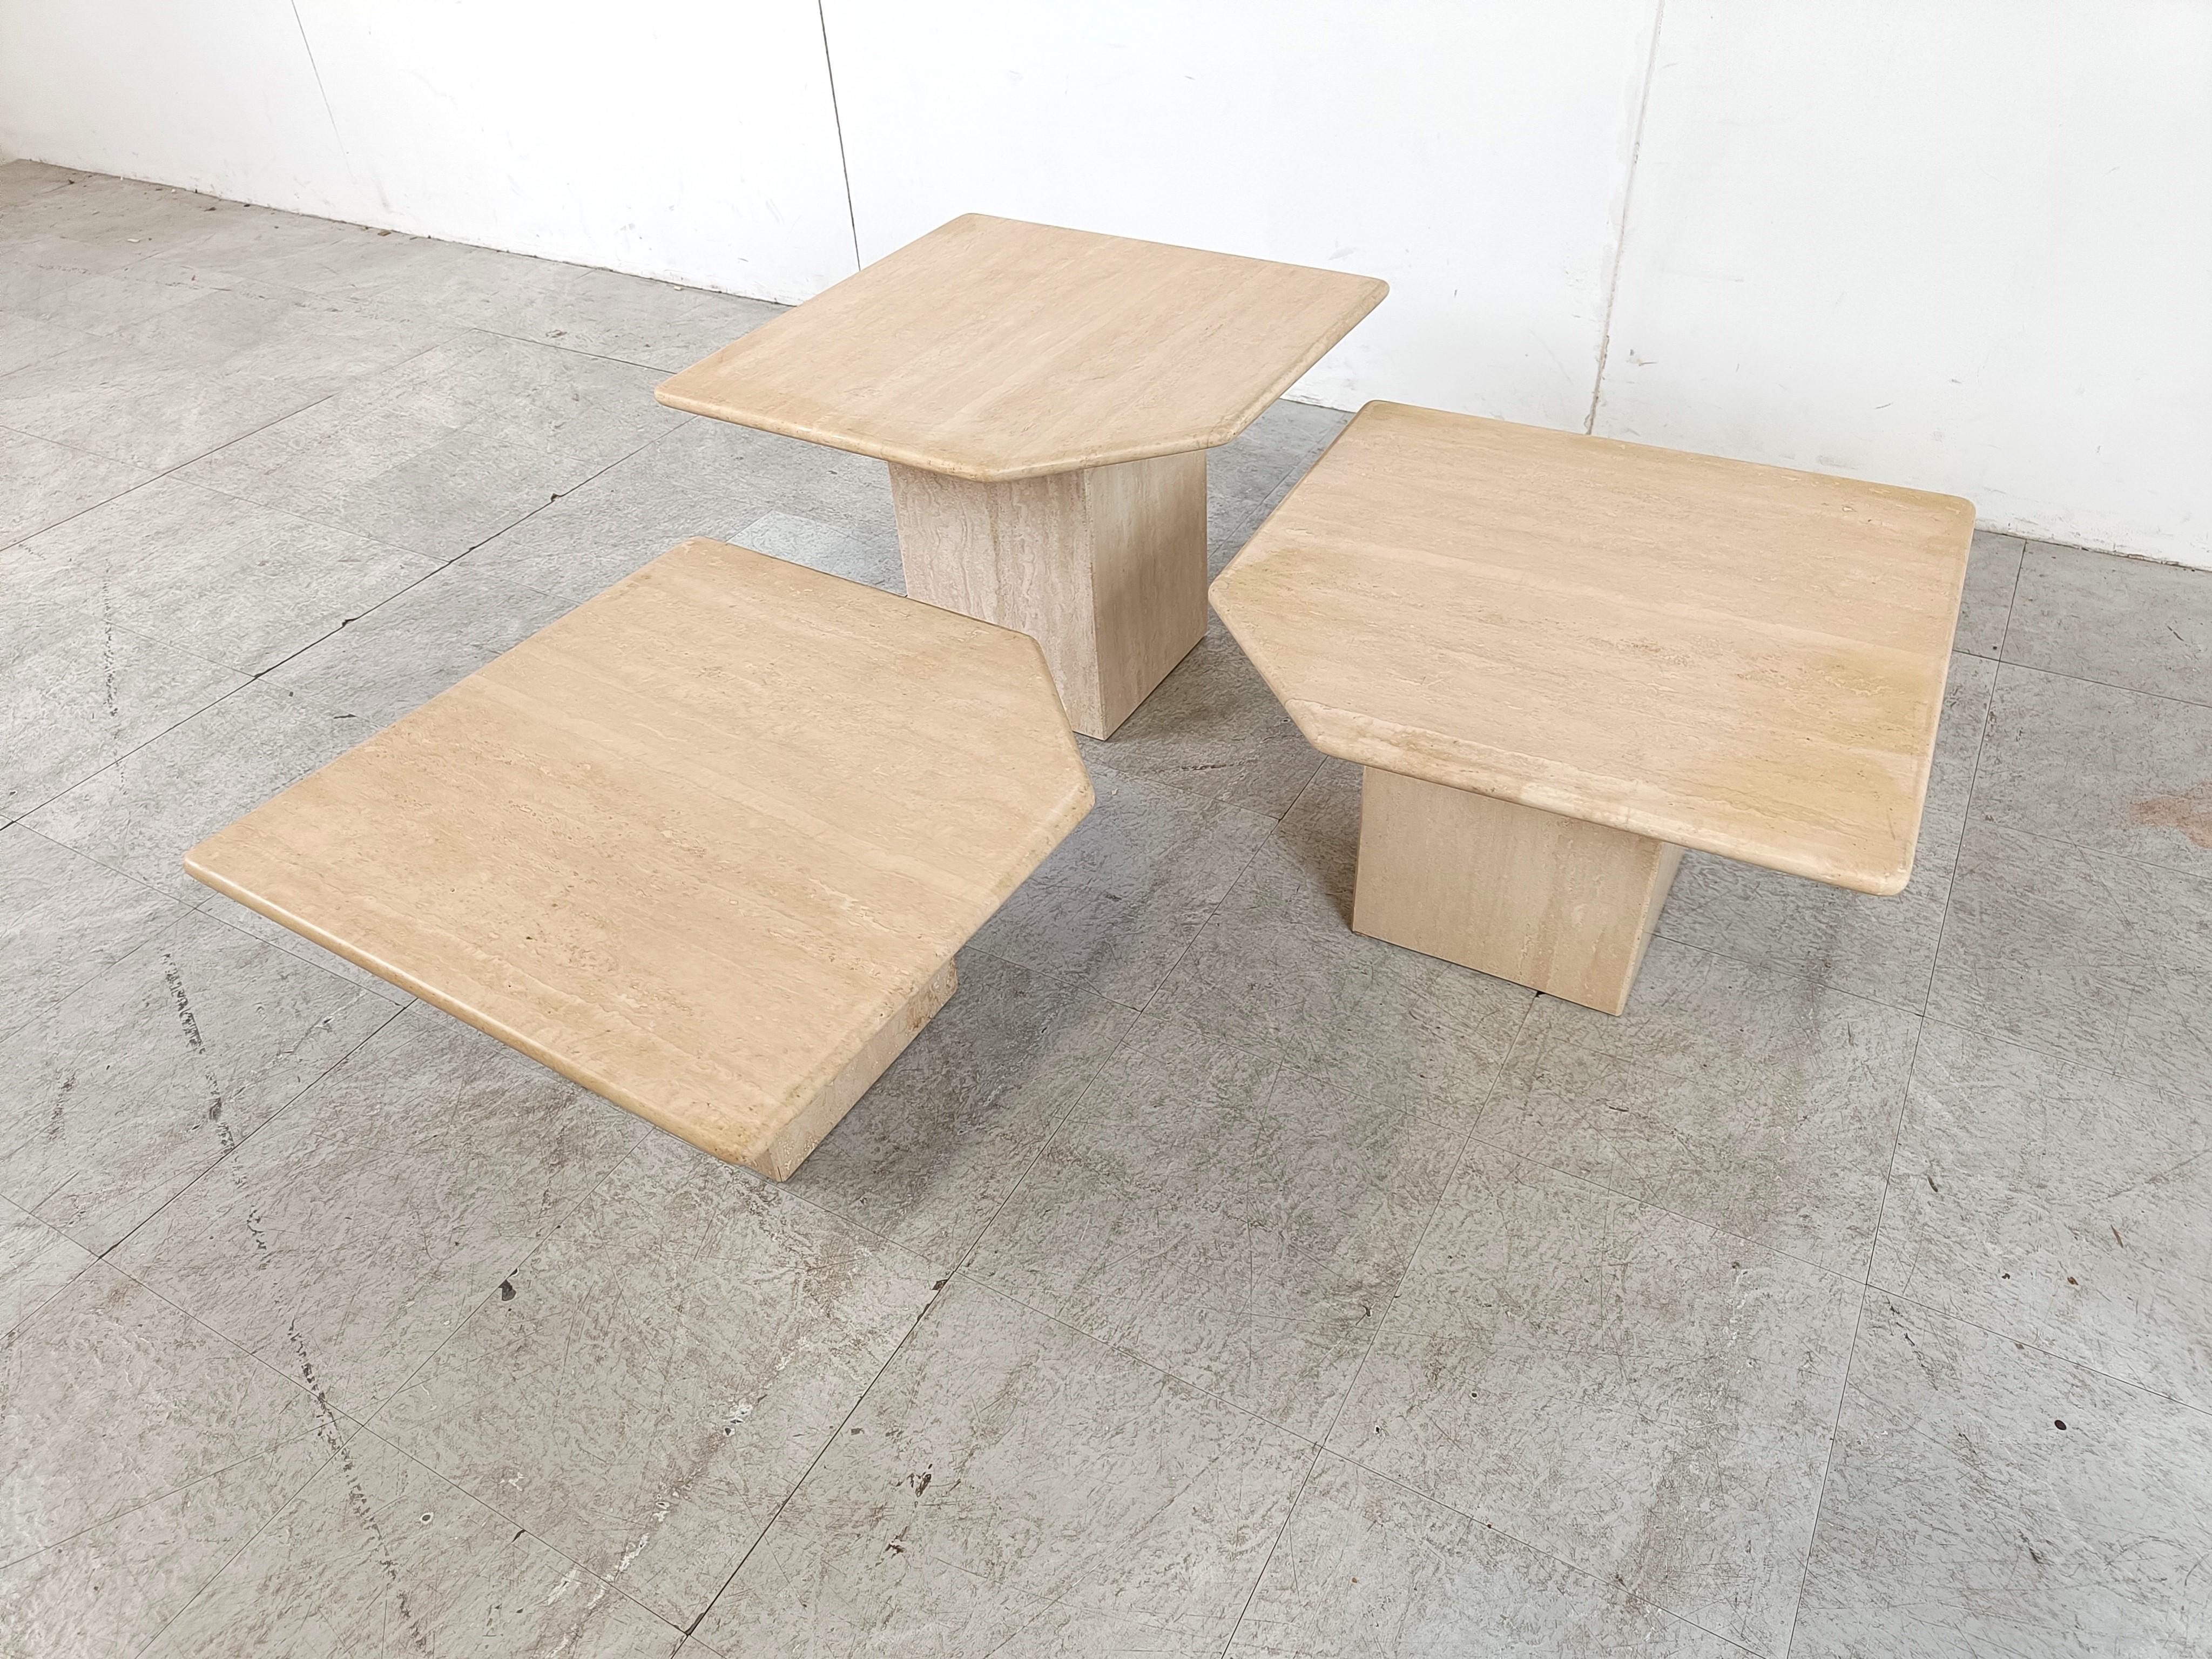 Set of 1970s italian travertine stone nesting tables or side tables.

The tables can be set up in different compositions. Timeless items.

Beautiful colour.

Very good condition

1970s - italy

Dimensions:
Largest table: 55*55*40 cm (height other